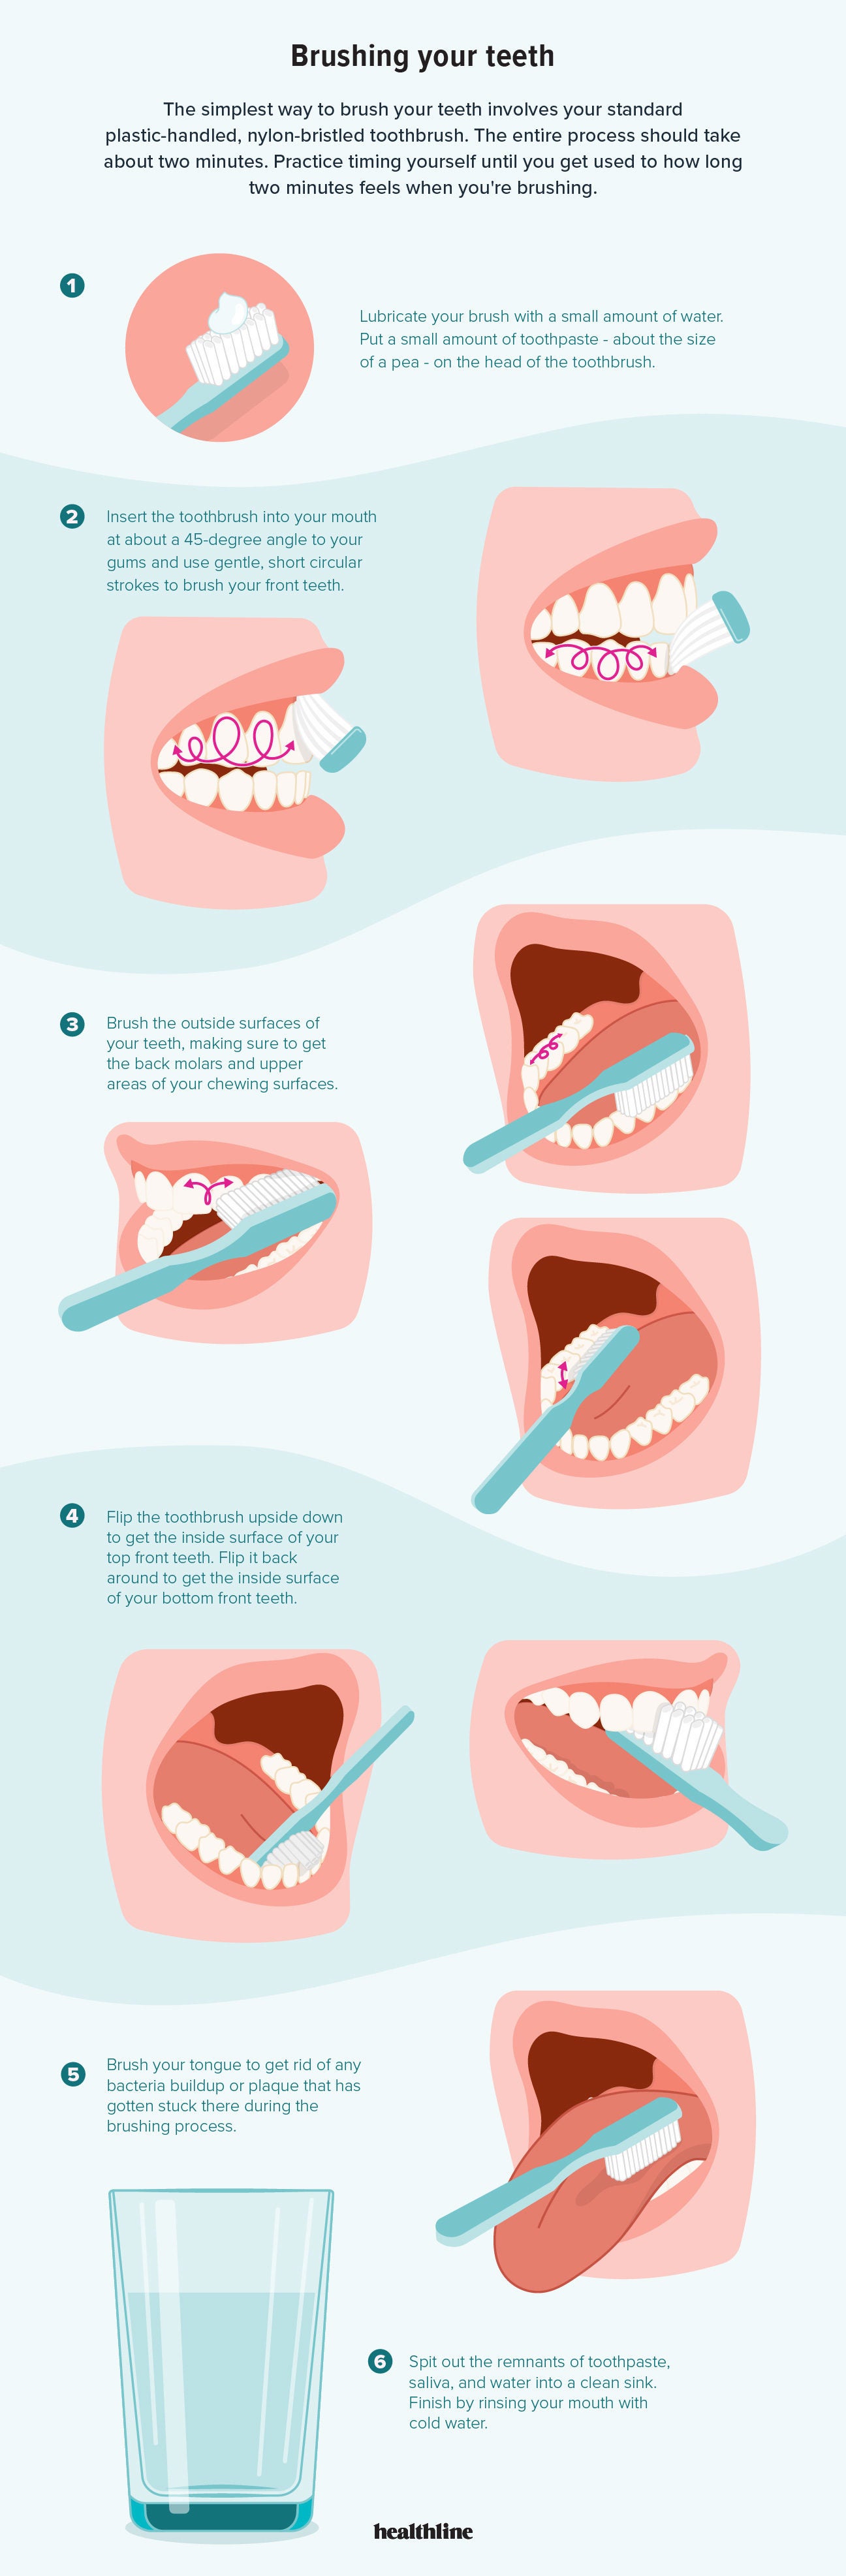 How To Brush Your Teeth With A Standard Or Electric Toothbrush